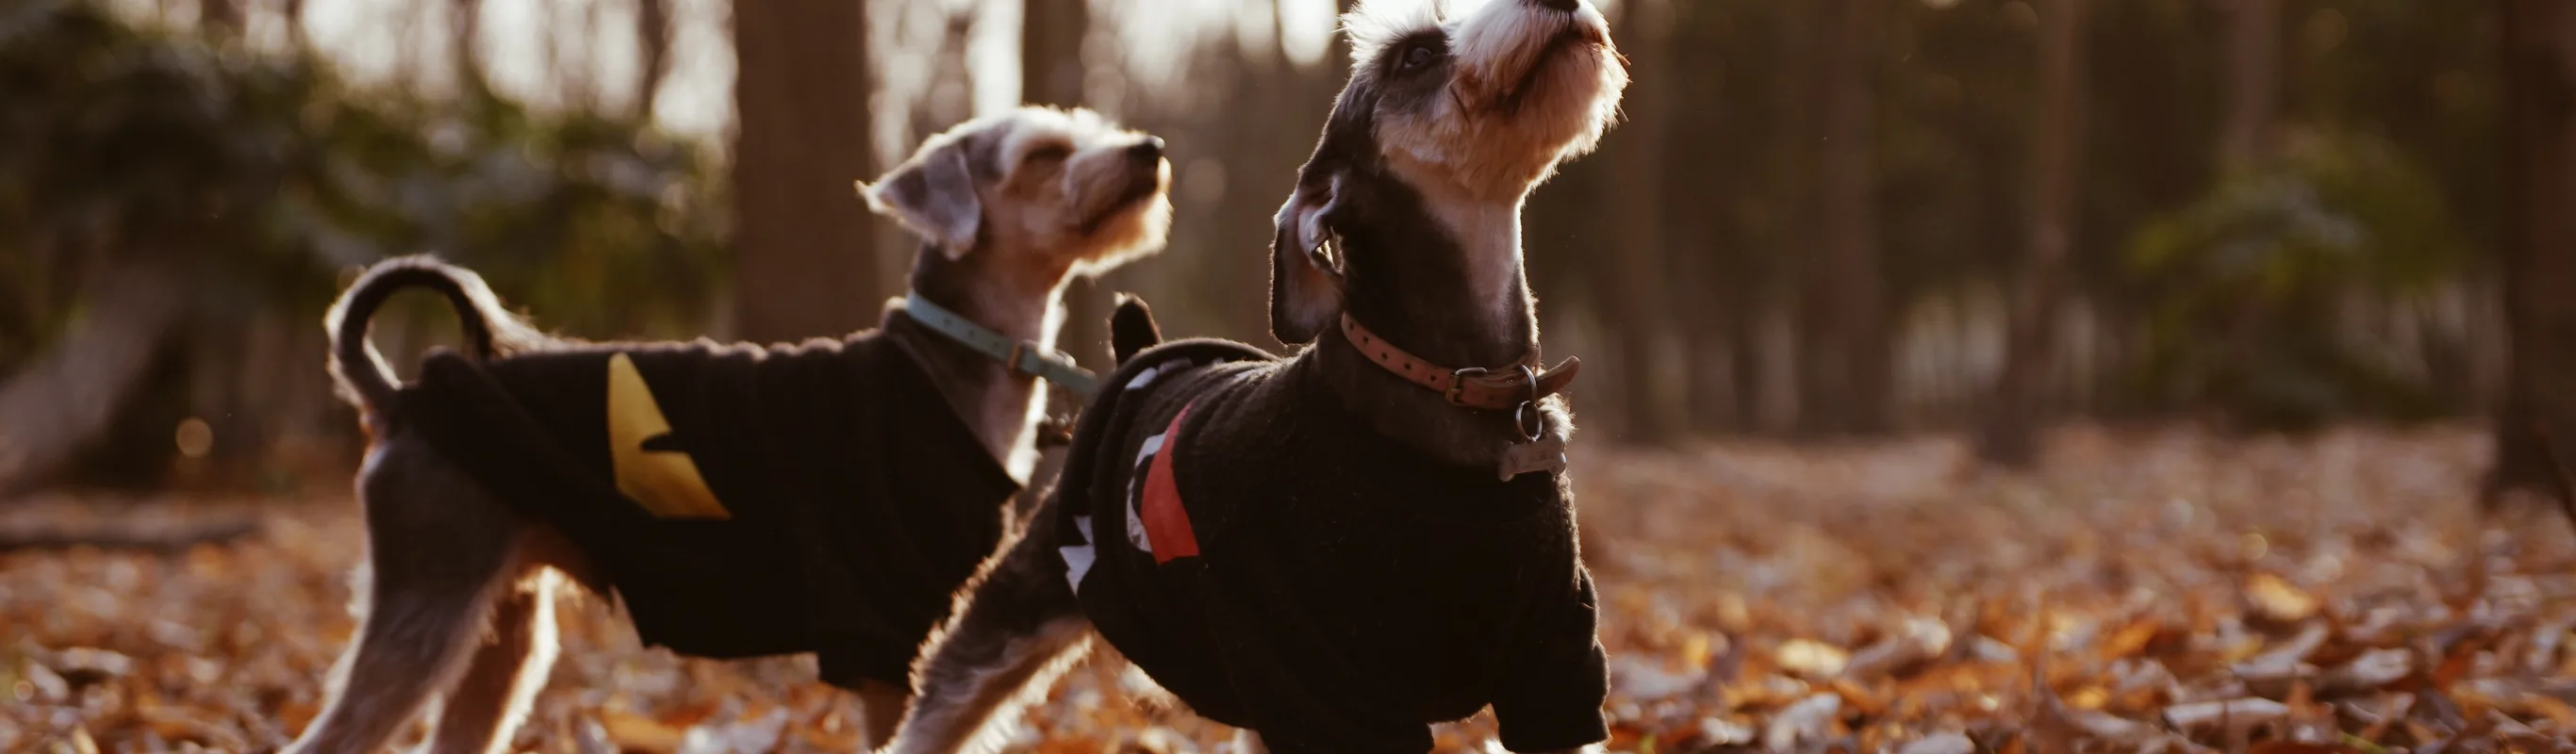 Dogs looking up while standing on fallen leaves